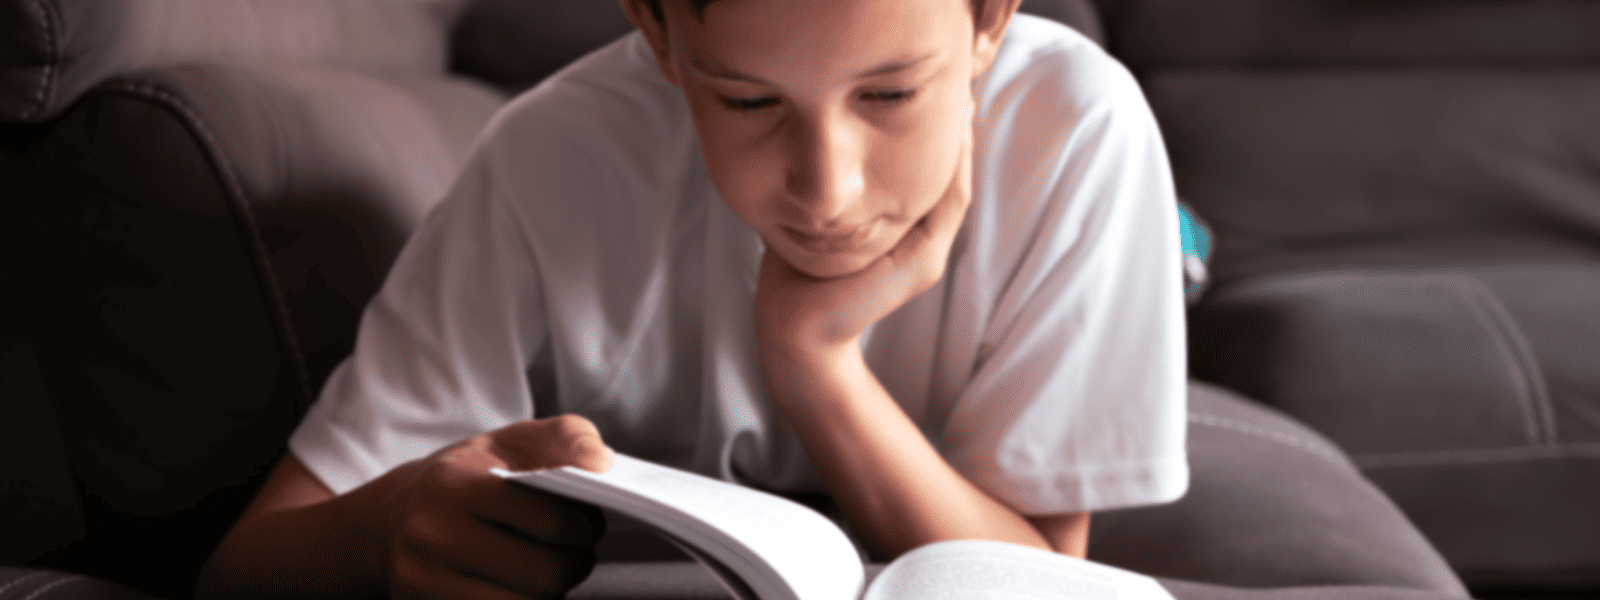 Reasons Why Kids Struggle With Reading Comprehension